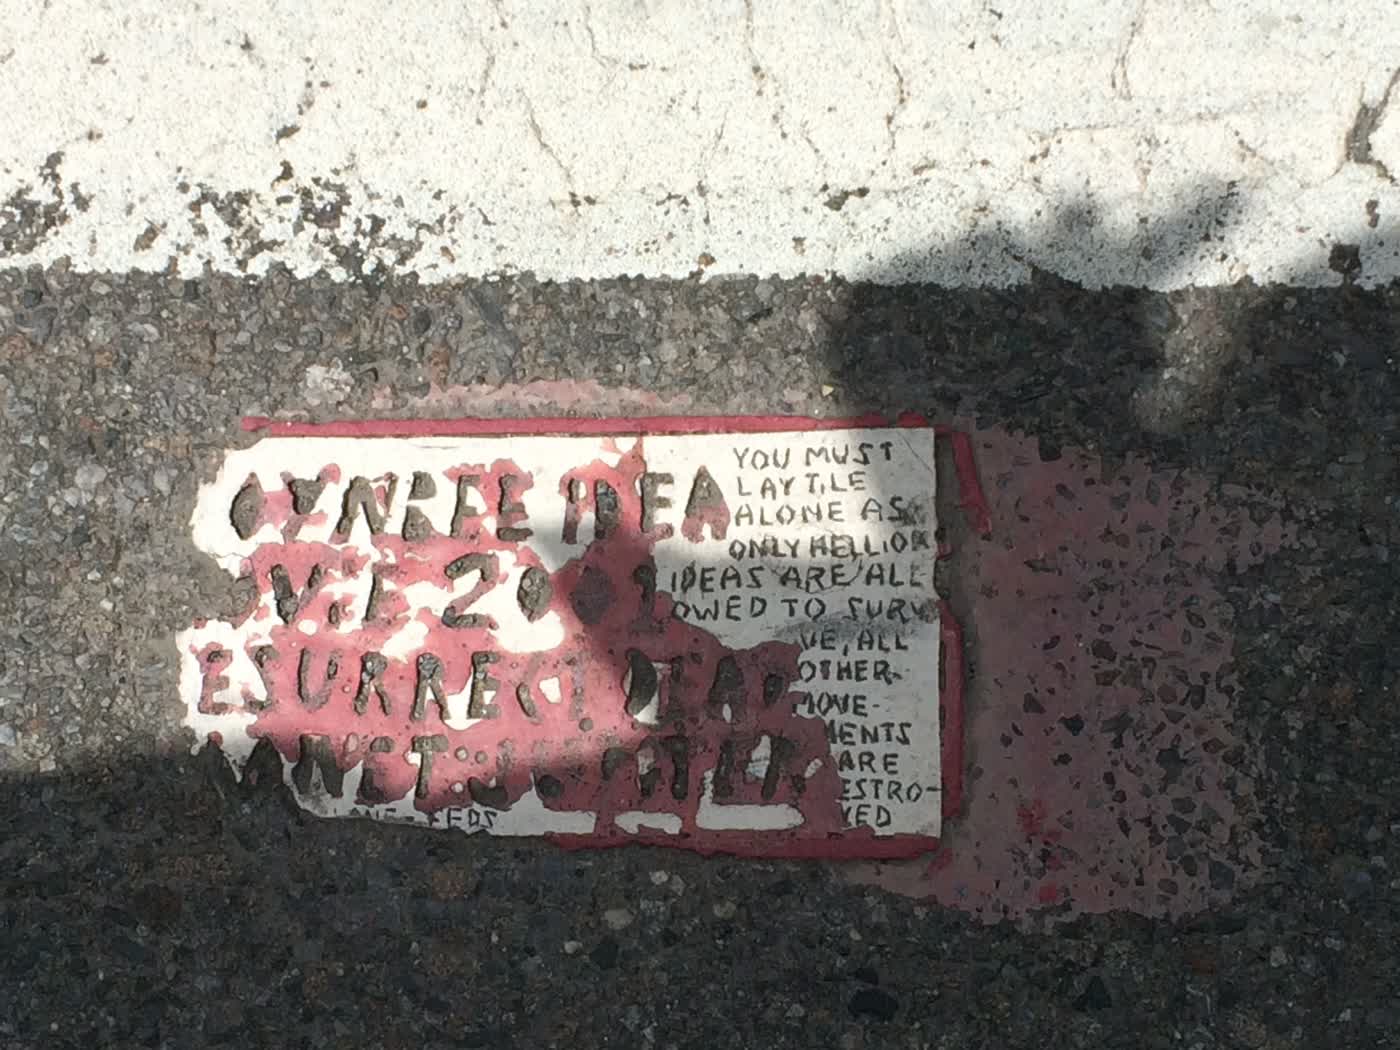 A small tile embedded in a road's asphalt reading, 'TOYNBEE IDEA IN MOVIE 2001, RESURRECT DEAD ON PLANET JUPITER', with a smaller side note reading, 'YOU MUST LAY TILE ALONE AS ONLY HELL OR IDEAS ARE ALLOWED TO SURVIVE, ALL OTHER MOVEMENTS ARE DESTROYED'